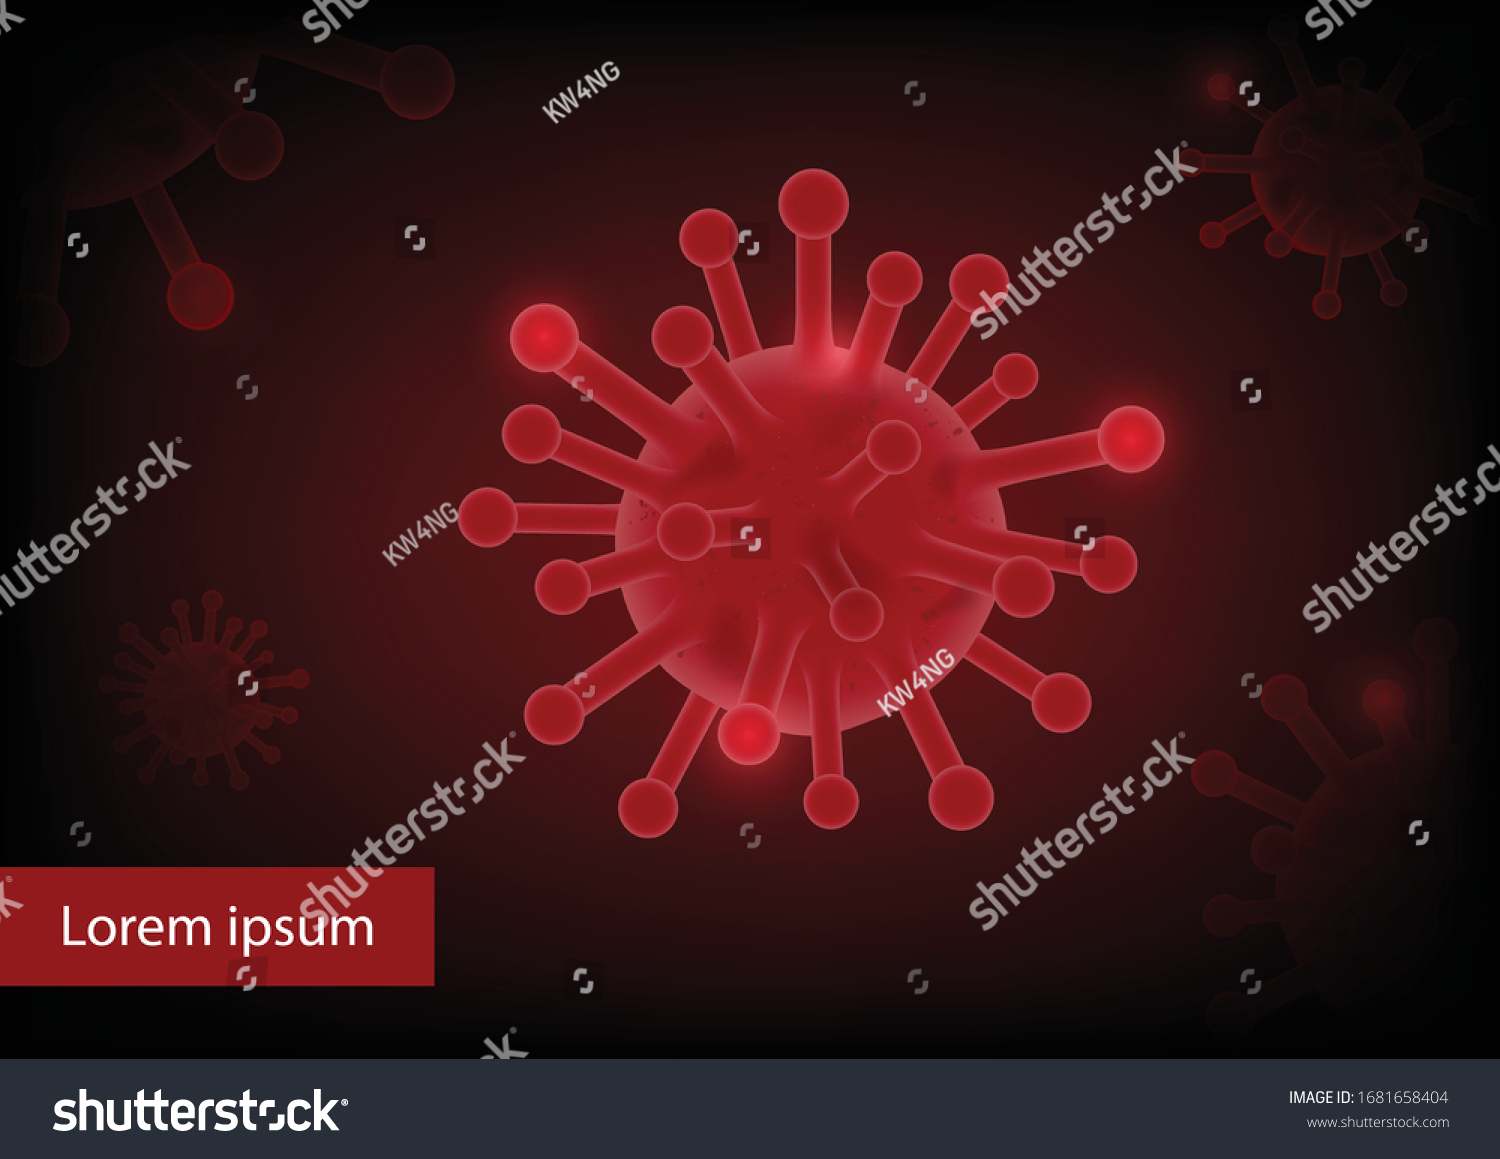 Red virus cells on dark background. Banner for pandemic infectious concept. Covid-19, Coronavirus or 2019-nCoV outbreak in Wuhan, China and world wide. Futuristic style design, vector illustration. #1681658404